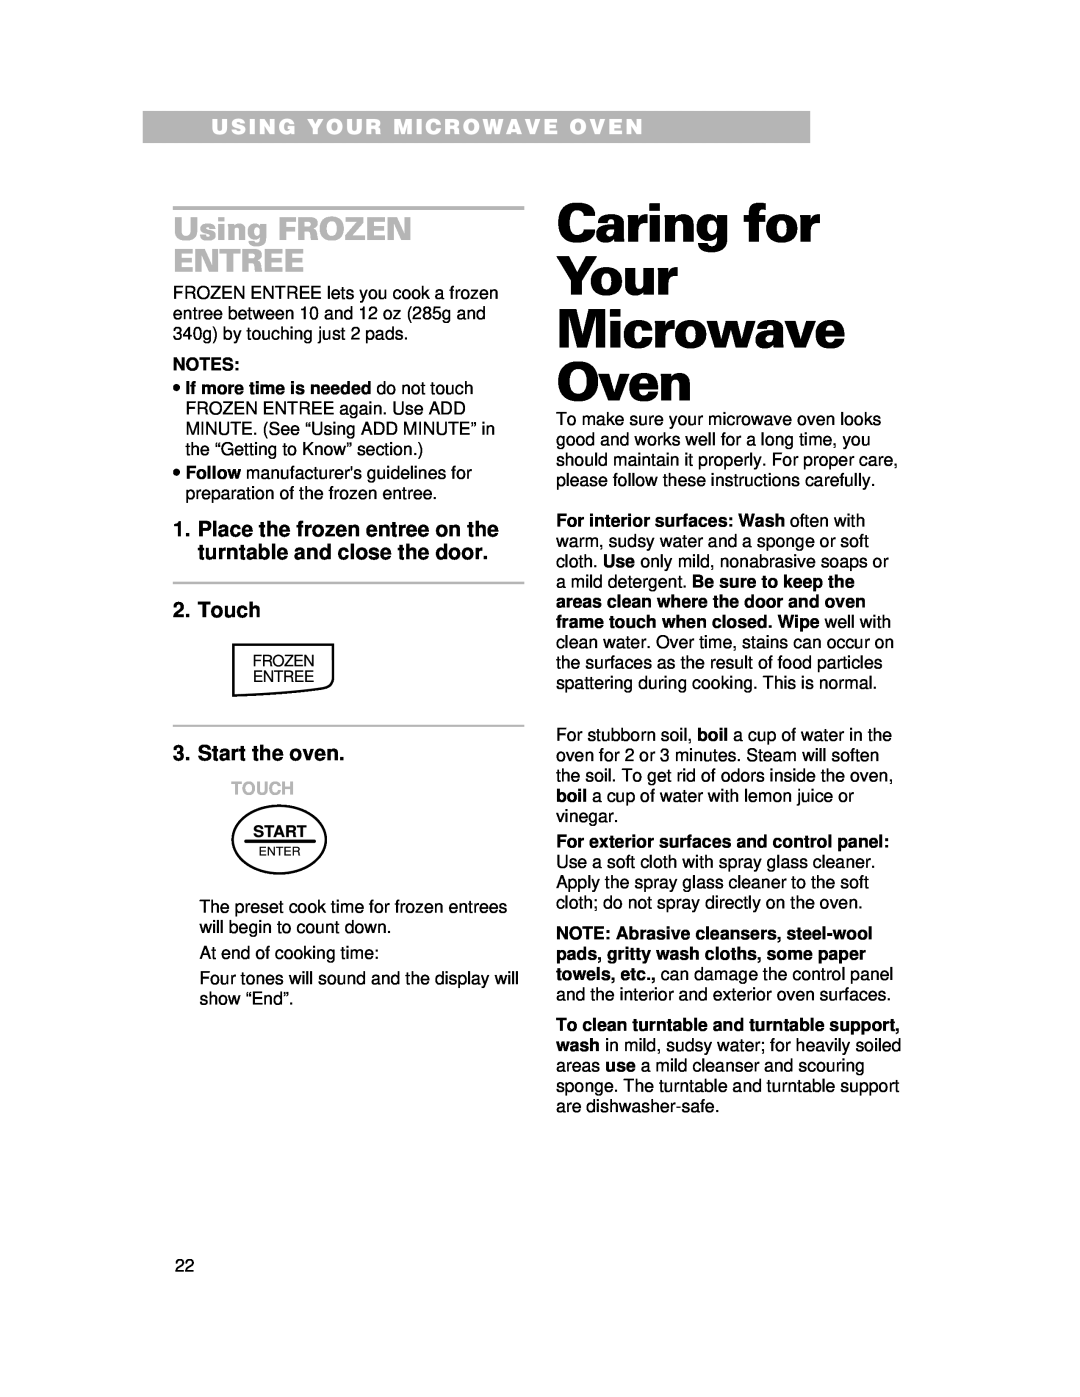 Whirlpool CMT061SG Caring for Your Microwave Oven, Using FROZEN ENTREE, Using Your Microwave Oven, Touch, Start the oven 